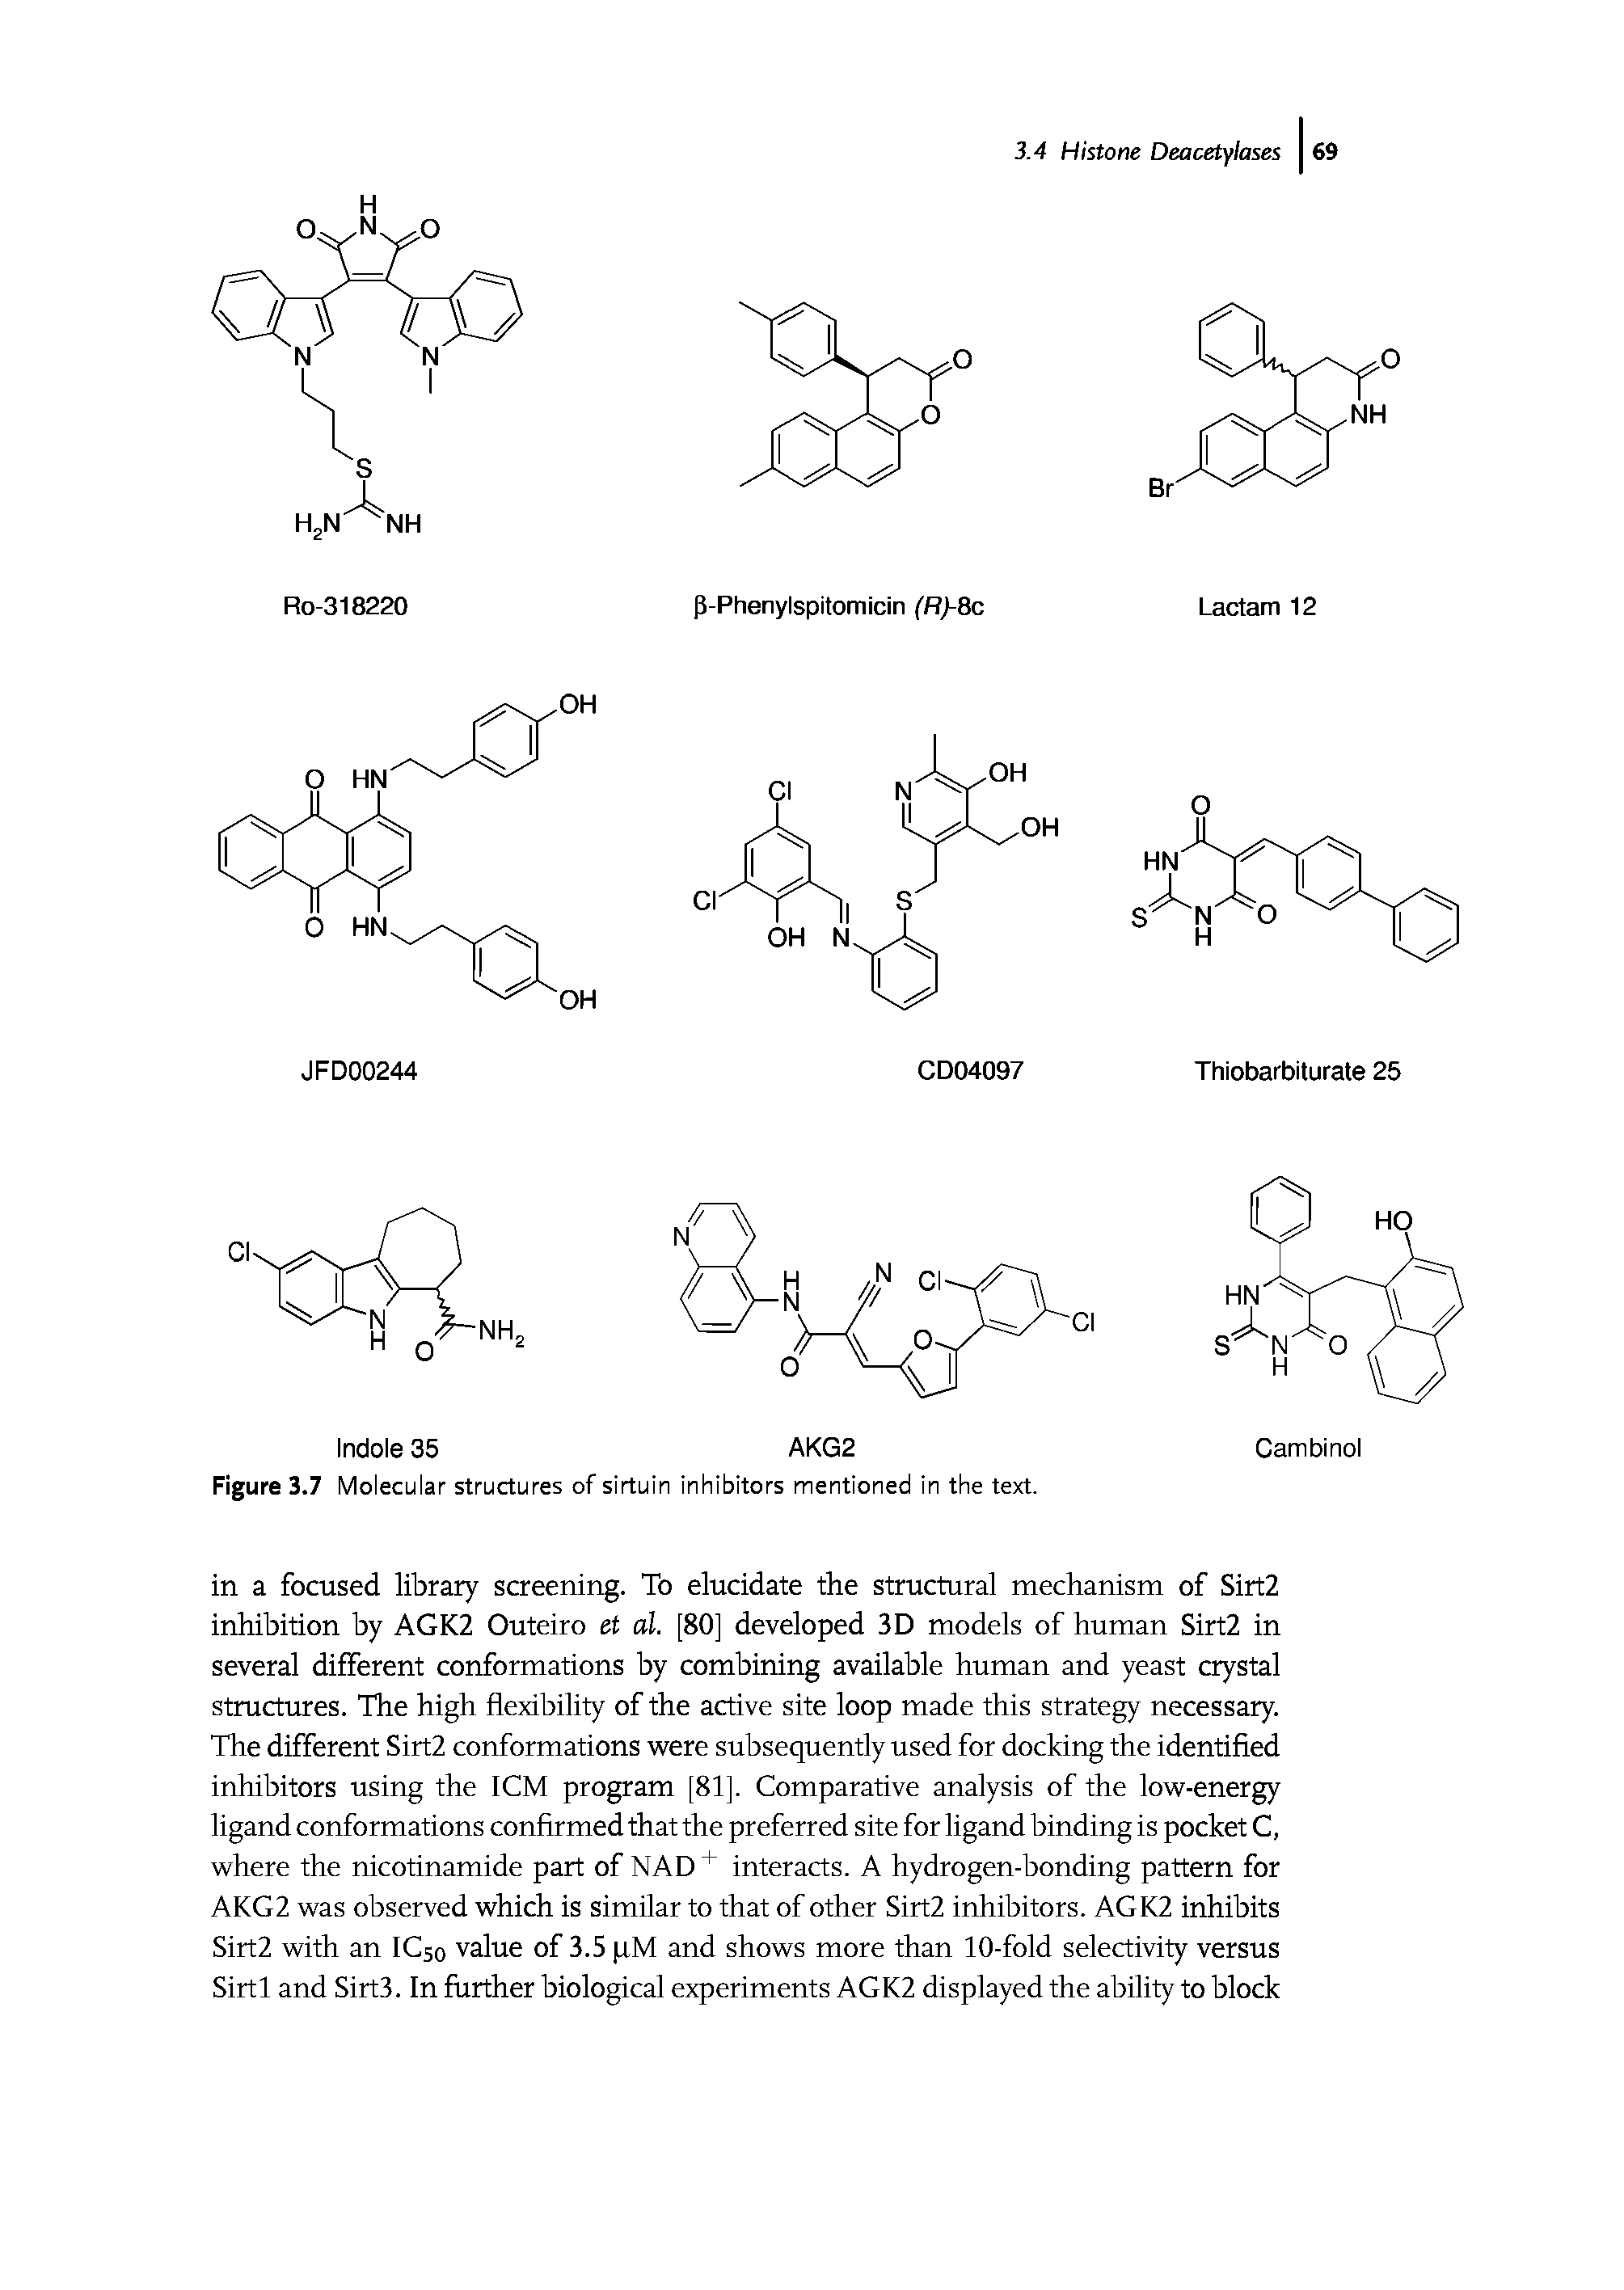 Figure 3.7 Molecular structures of sirtuin inhibitors mentioned in the text.